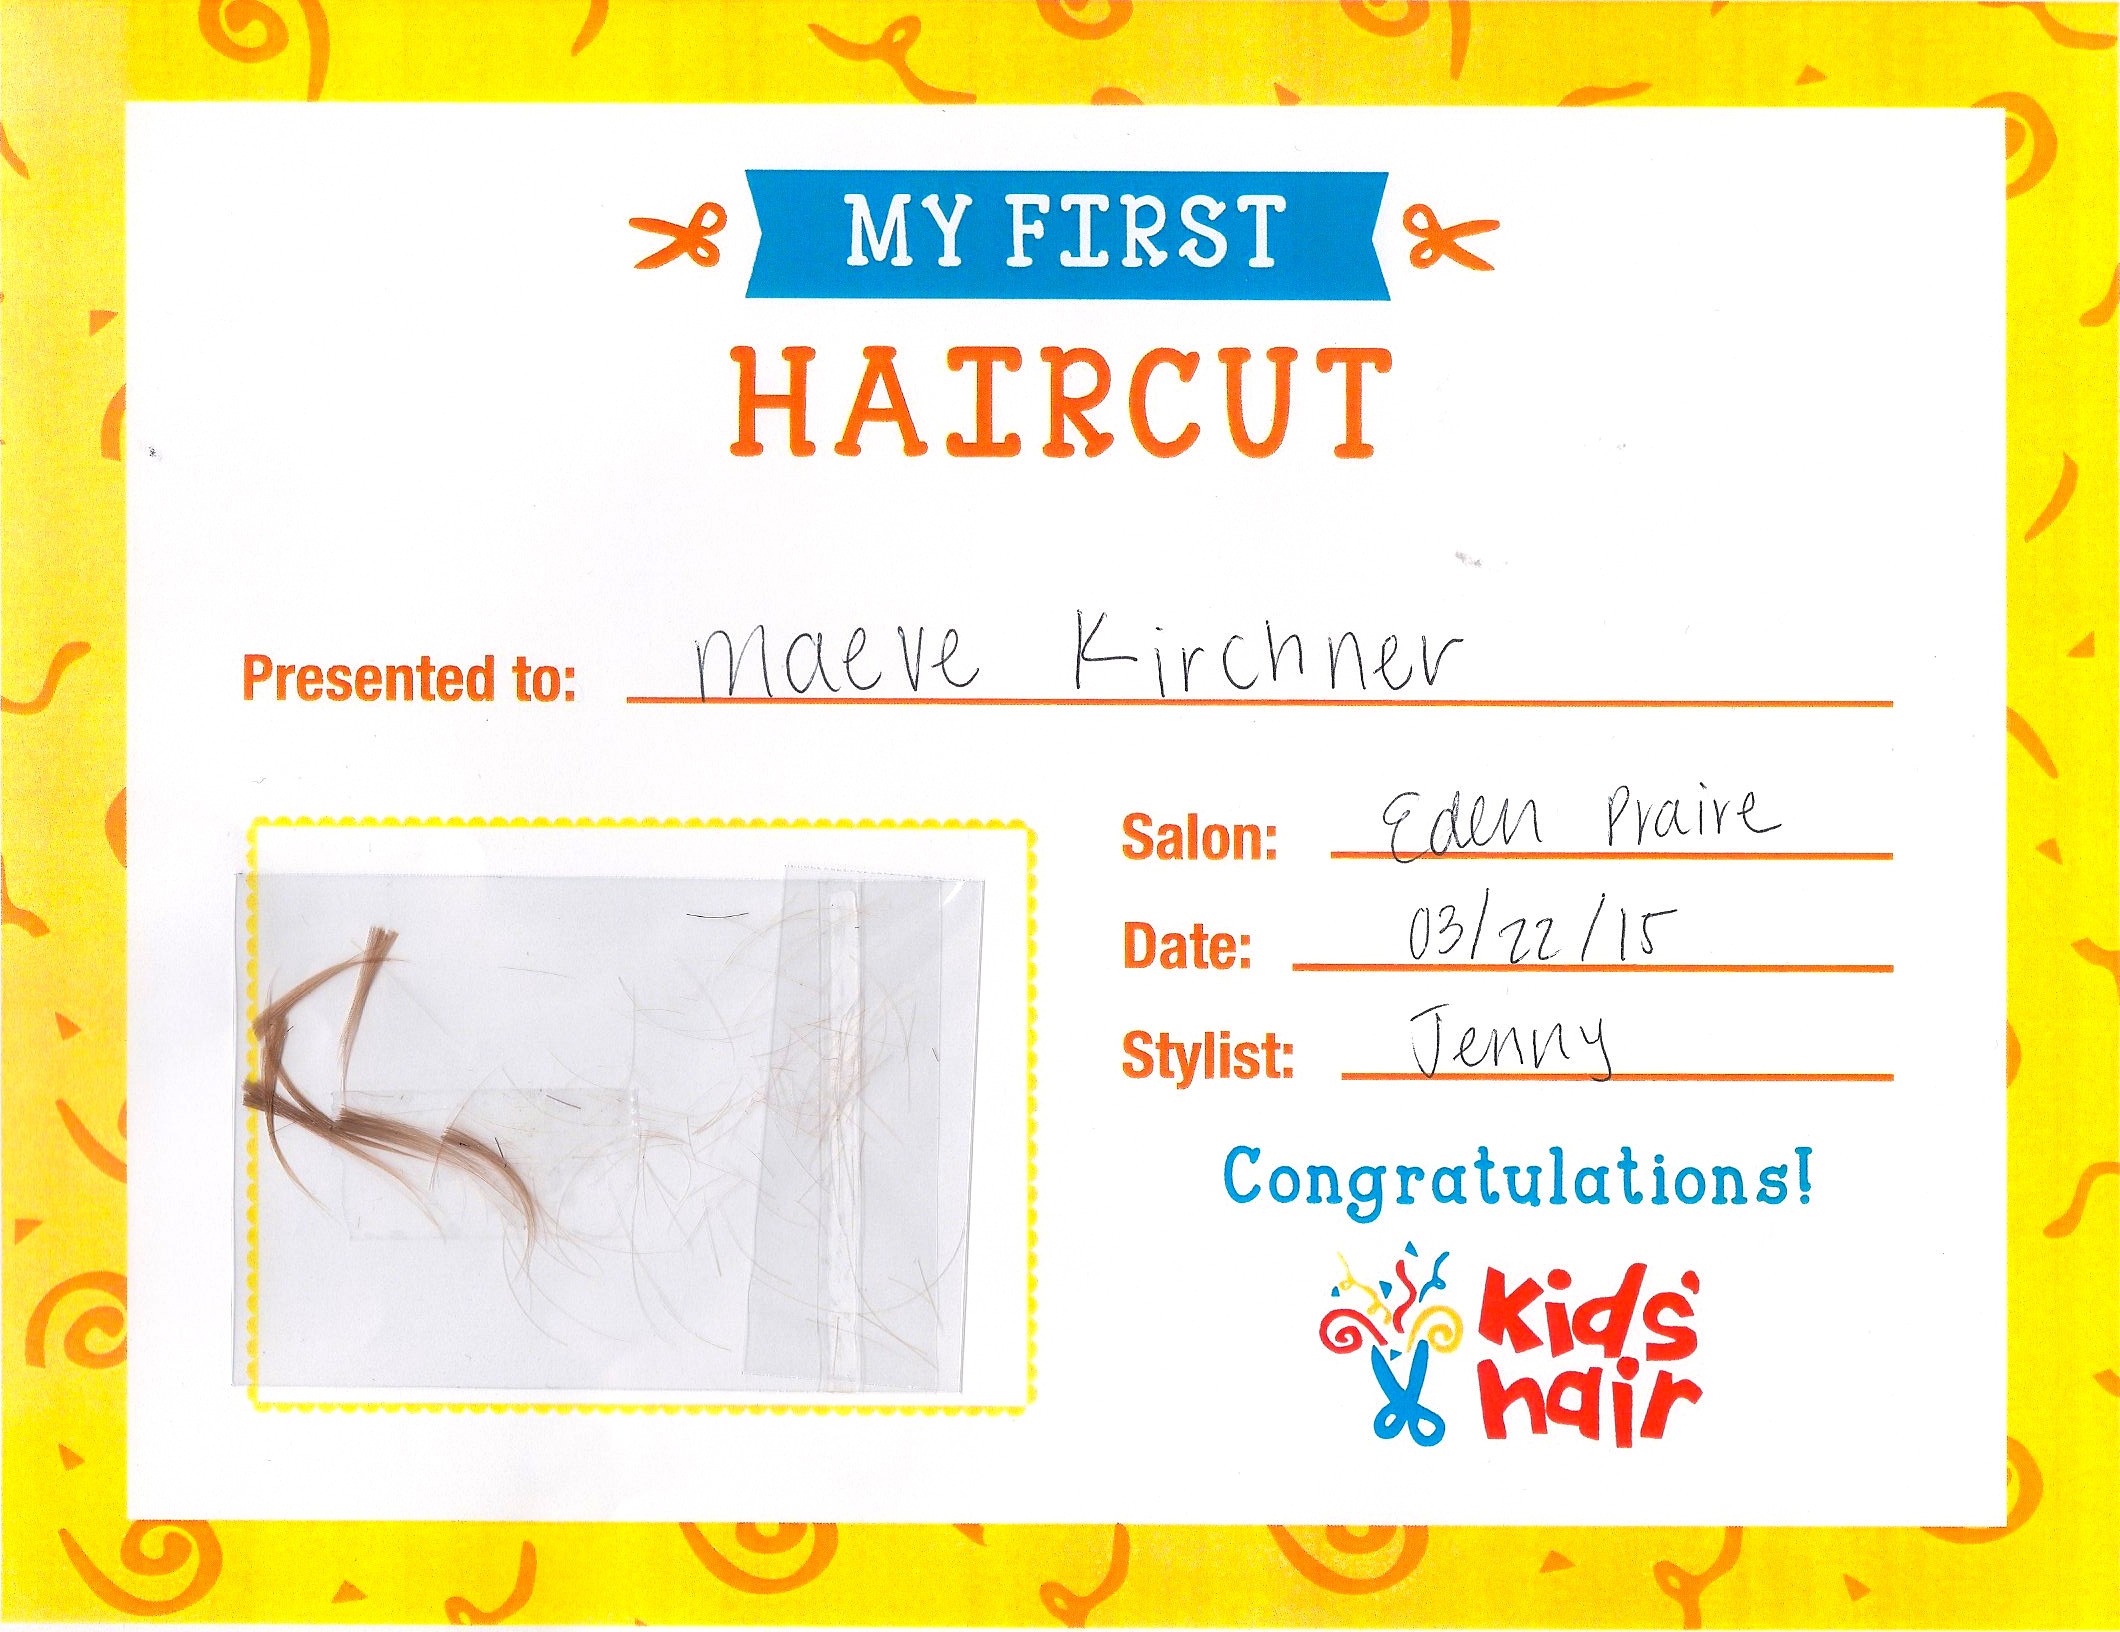 My First Haircut Certificate Printable Demire Agdiffusion Com Template